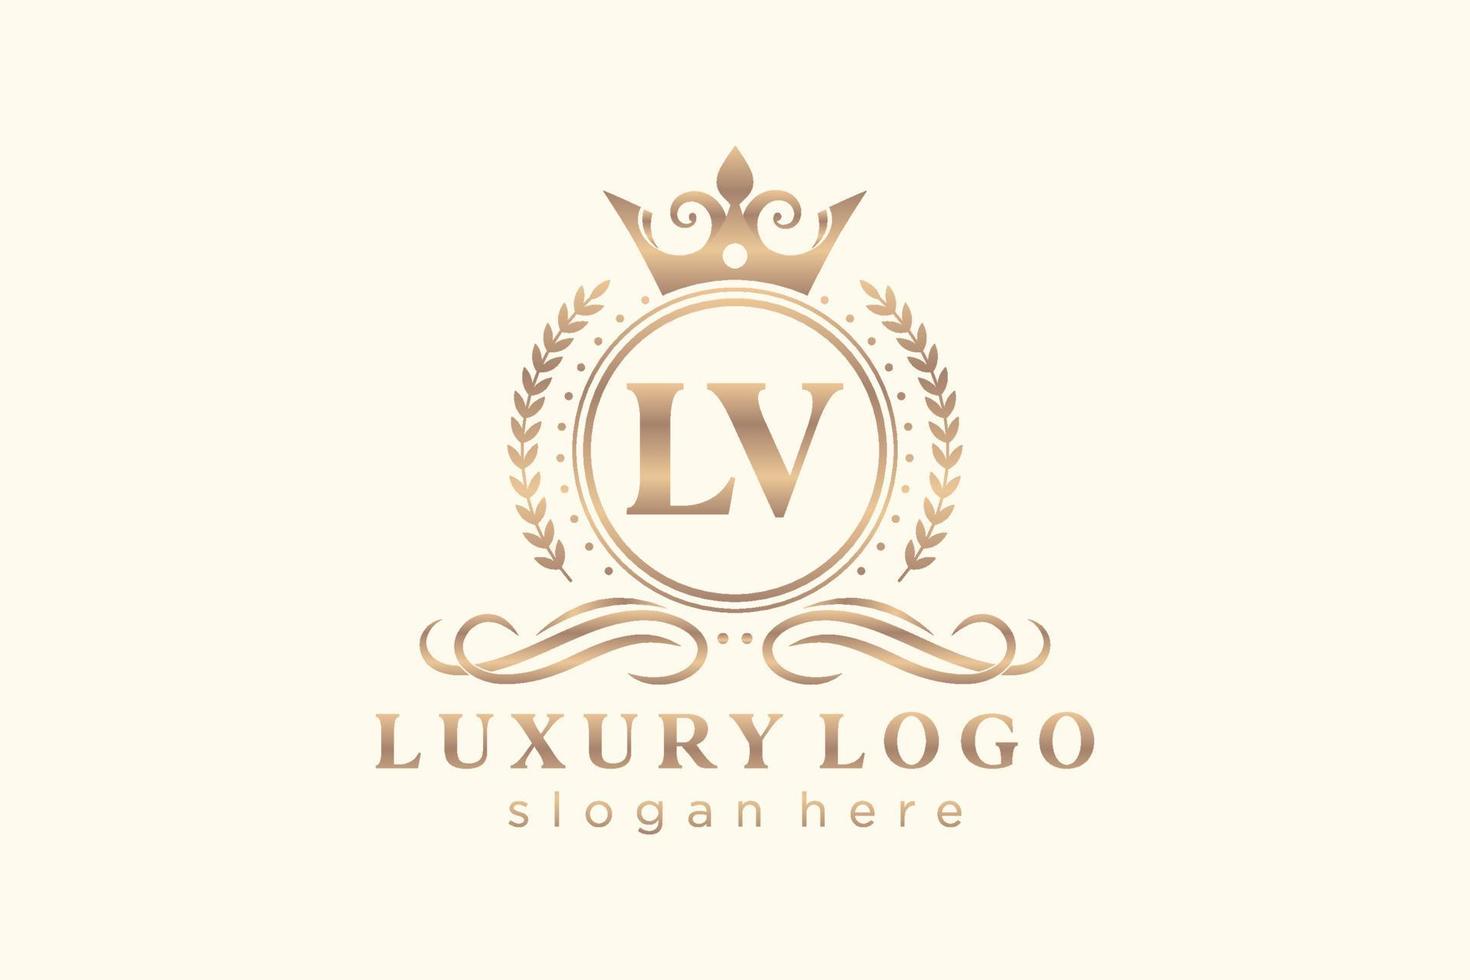 Initial LV Letter Royal Luxury Logo template in vector art for Restaurant, Royalty, Boutique, Cafe, Hotel, Heraldic, Jewelry, Fashion and other vector illustration.